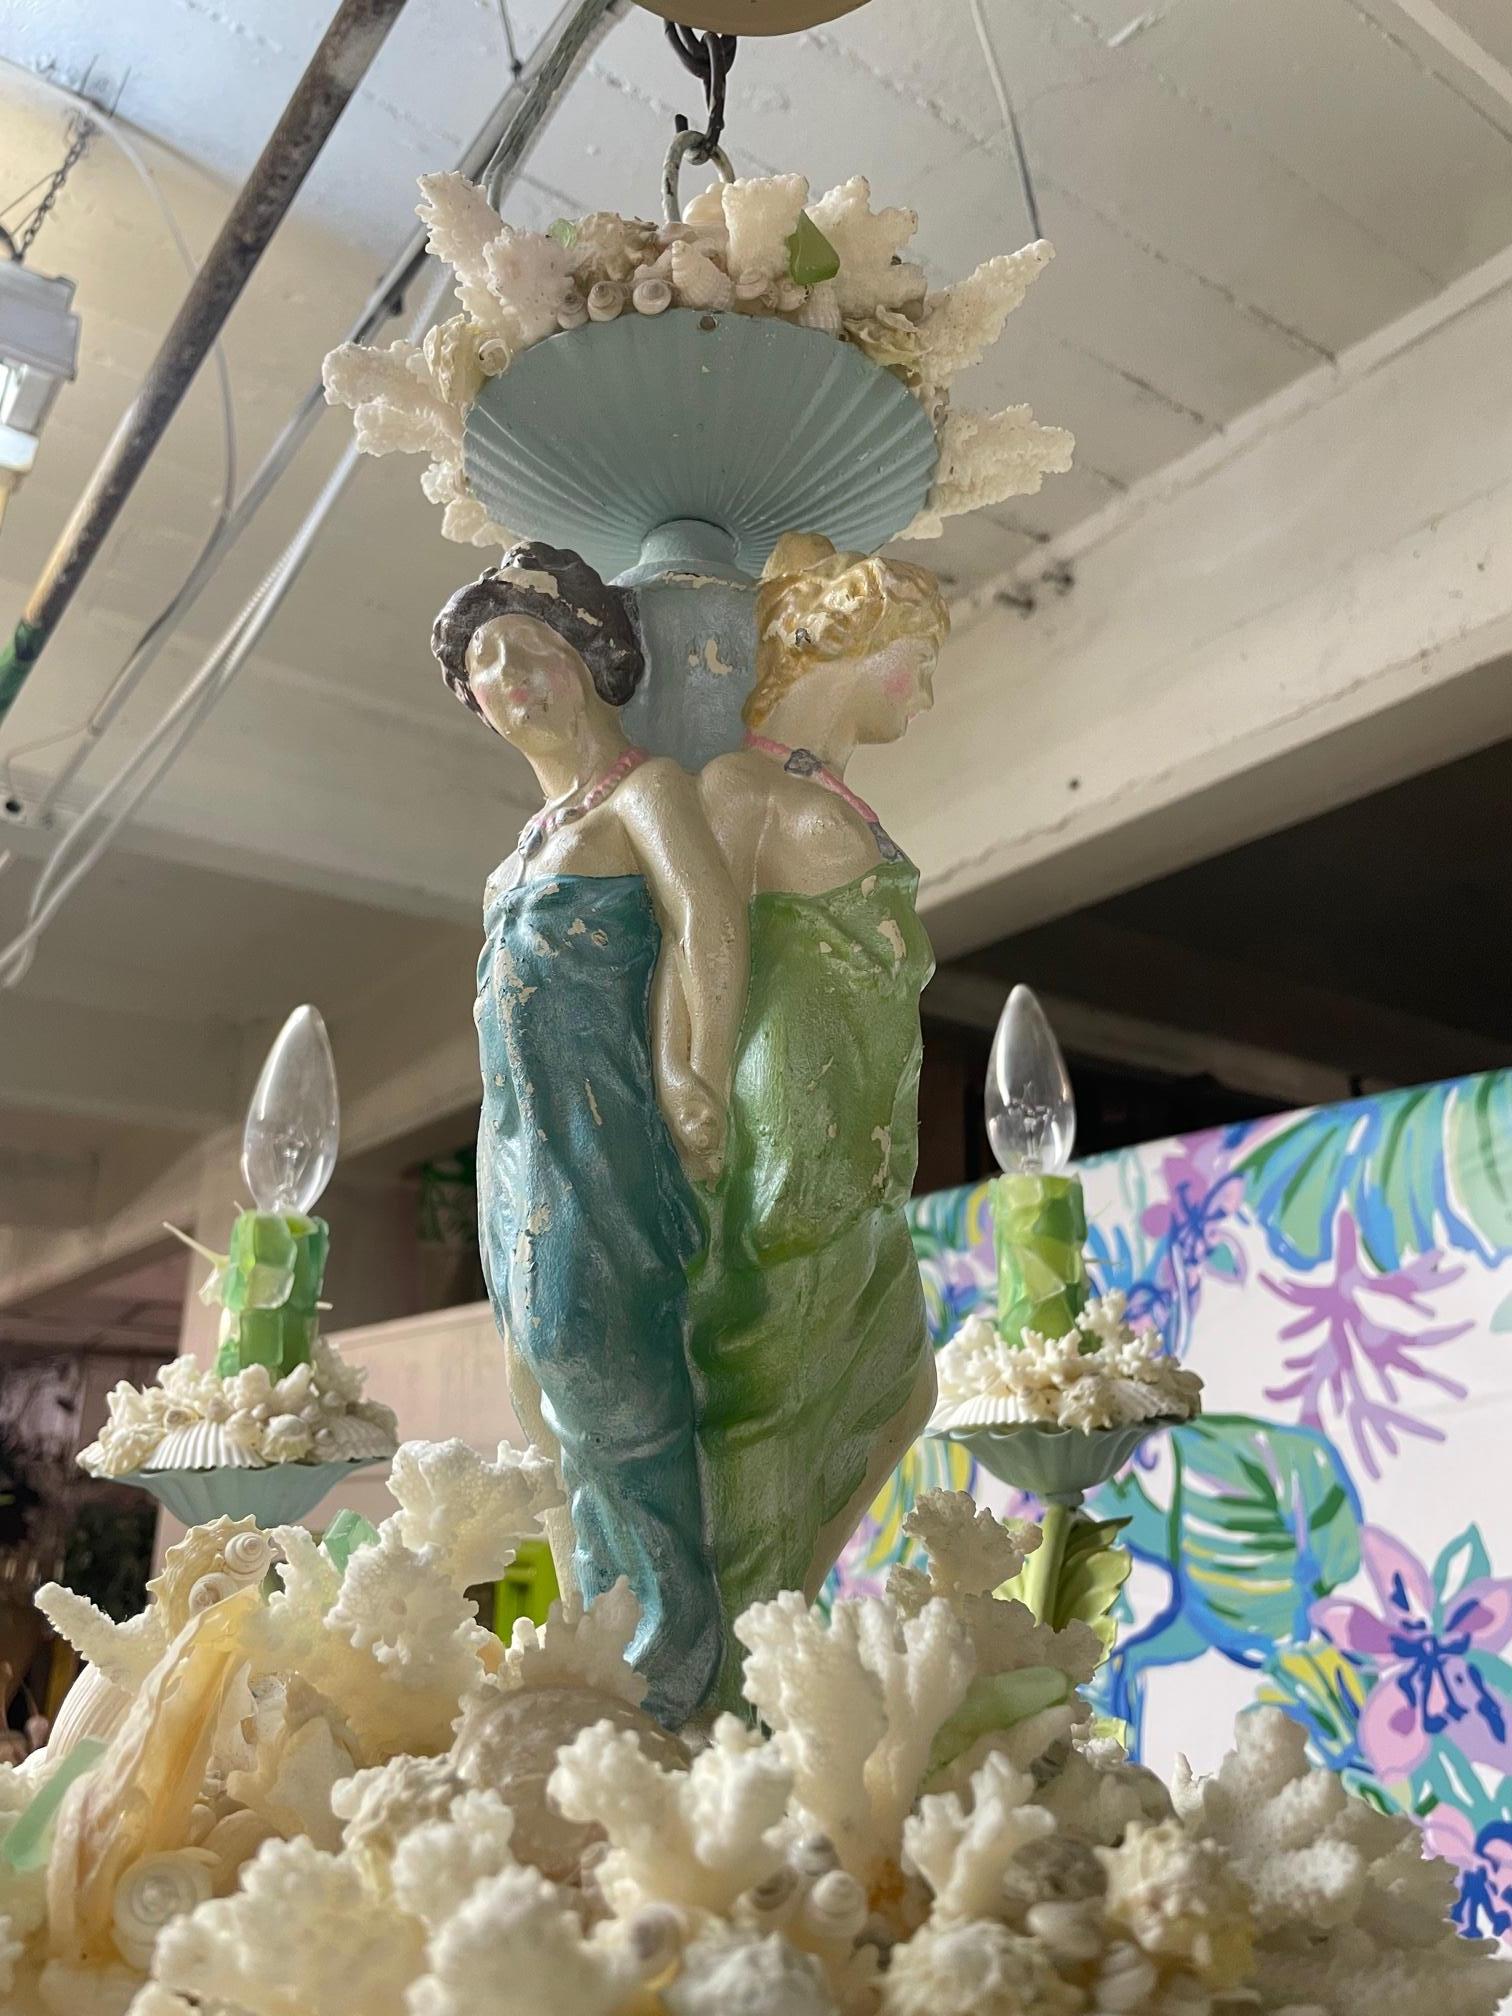 Handmade chandelier by a South Florida artist features an original tole chandelier decorated with seashells, corals, and vintage figurines. Truly unique. Good condition with minor imperfections consistent with age.